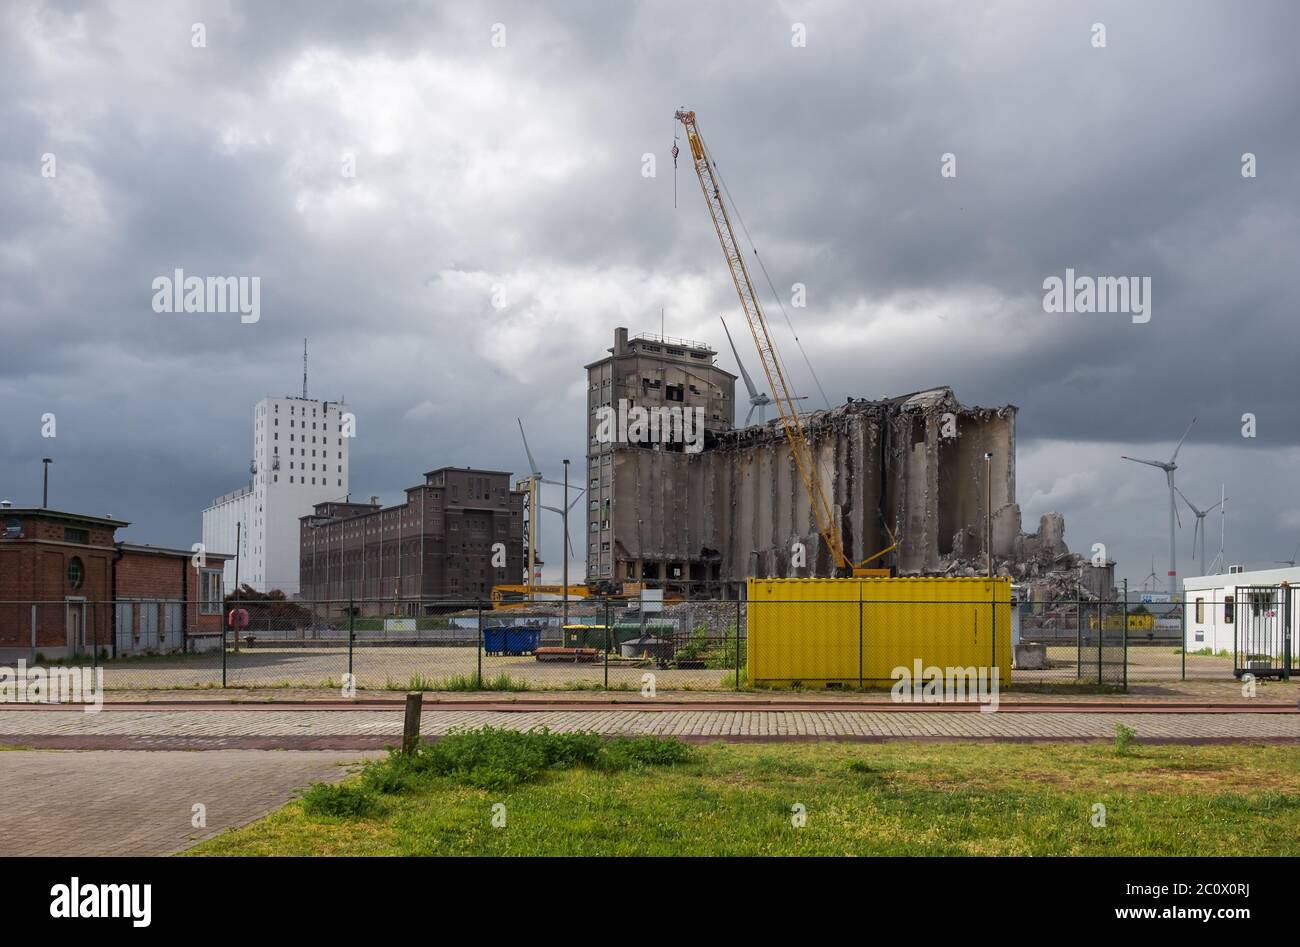 Old grain warehouse SAGMA being demolished to make way for an extension of the Antwerp ringway. Stock Photo